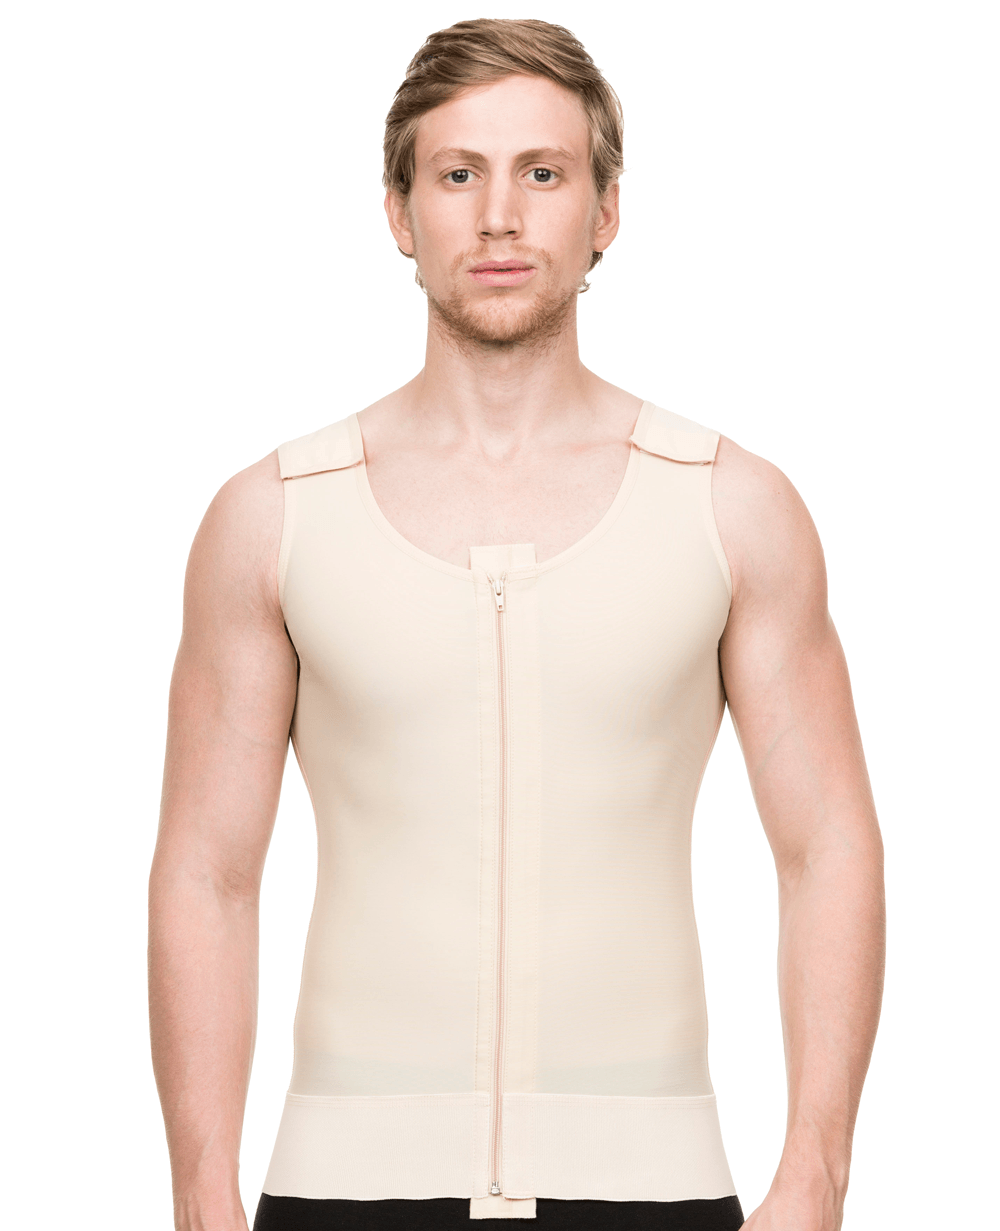 Male Full Body Below the Knee Length Abdominal Cosmetic Surgery Compression  Garment with Zipper (Sleeveless) (MG02-BK)